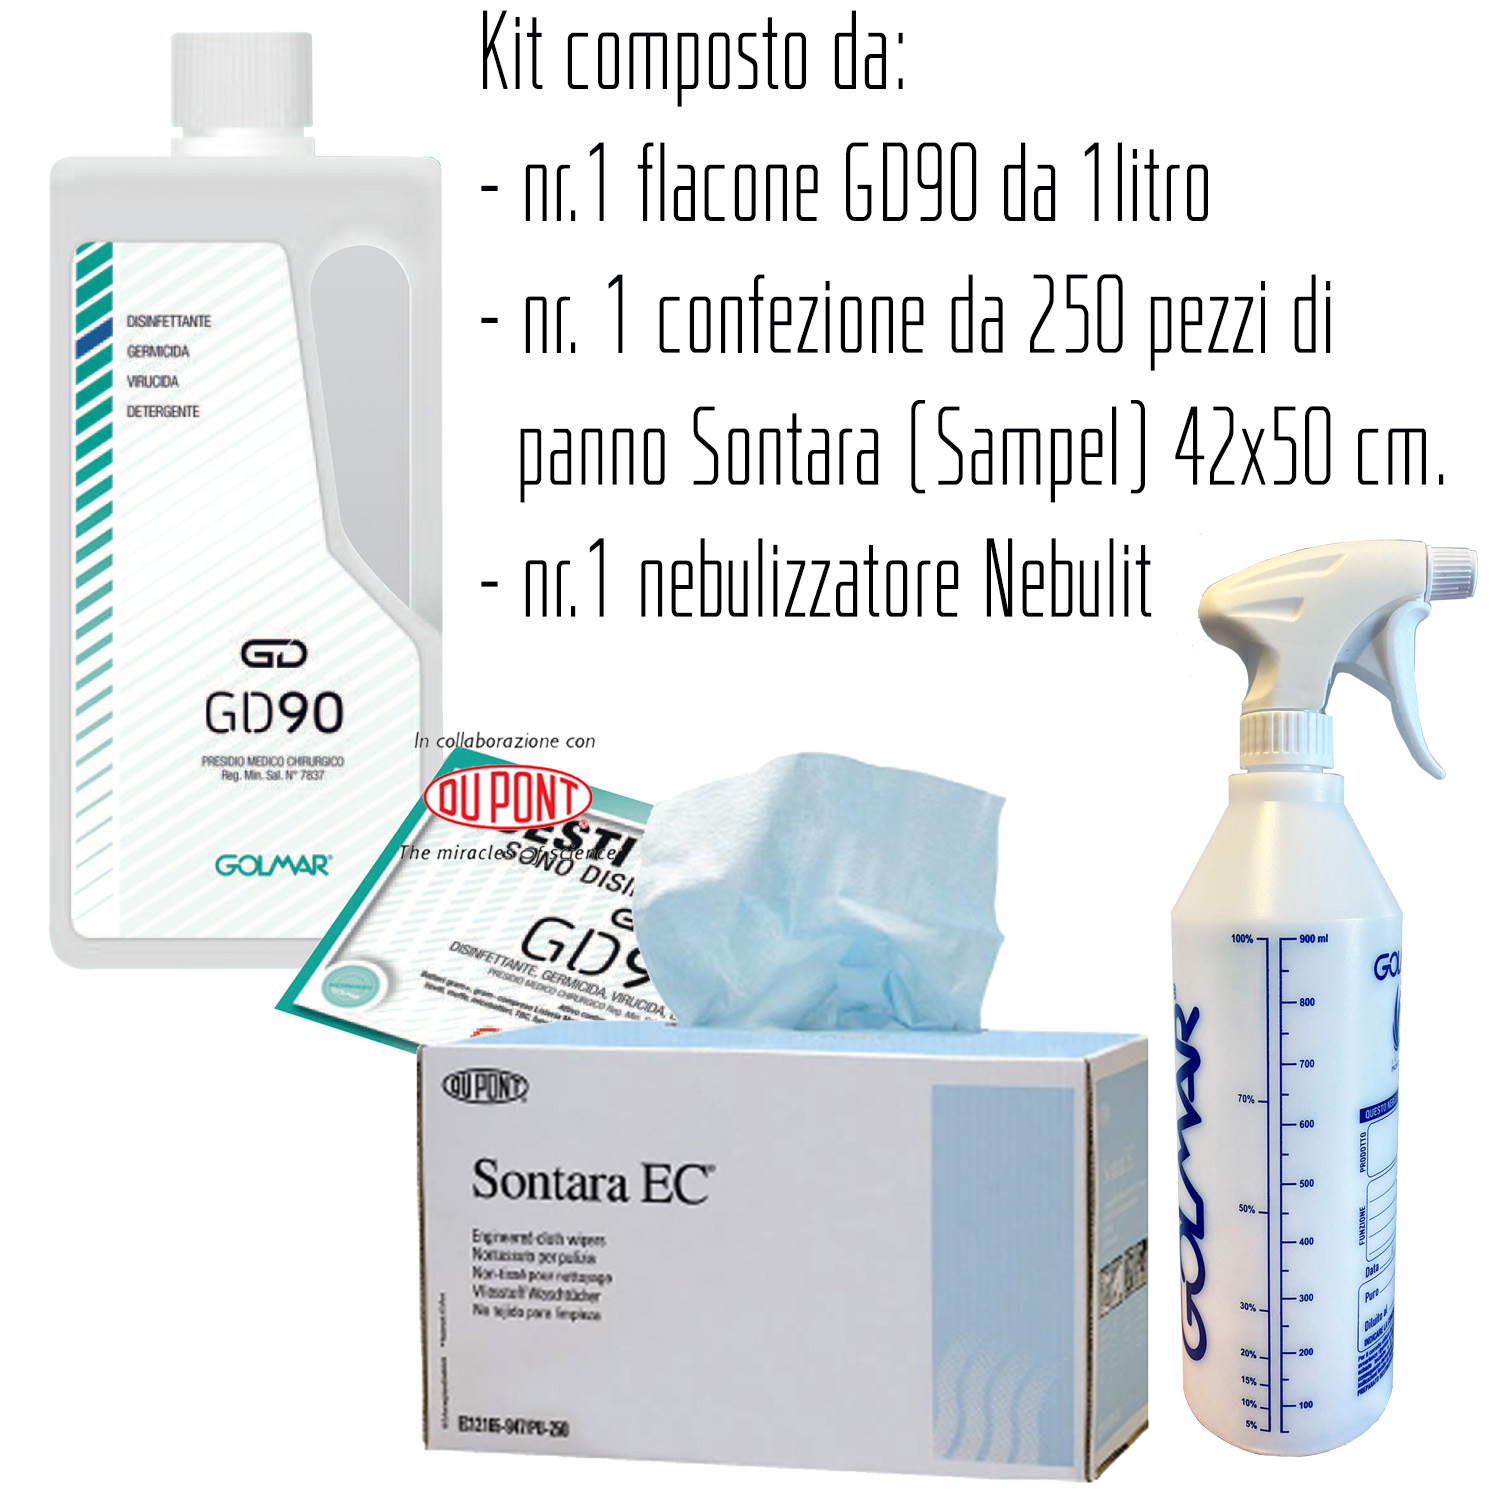 Kit including: n° 1 bottle GD90 liquid 1 liter - Biocide - broad-spectrum professional disinfectant (effective against viruses, bacteria, yeasts and molds), n° 1 trigger bottle NEBULIT (graduated nebulizer 1 lt – for dosing liquid GD90 diluted to 5% with water), n° 1 package with 250 pcs. SONTARA EC® - High-performance non-woven fabric cloth 42x50 cm